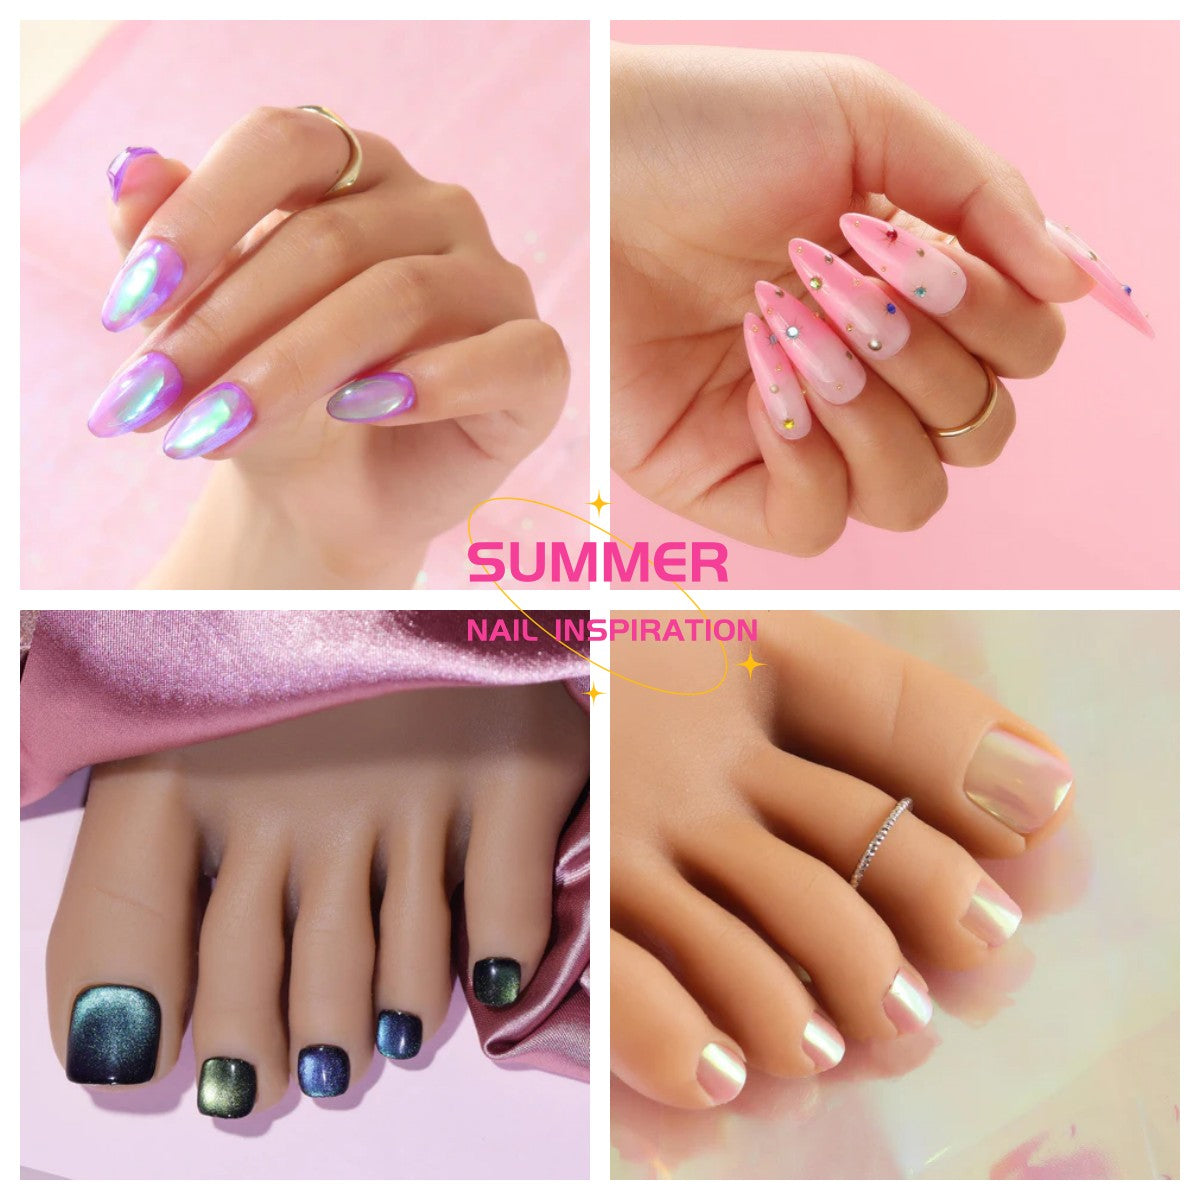 12 Gorgeous Summer Nail Designs For Your Next Manicure